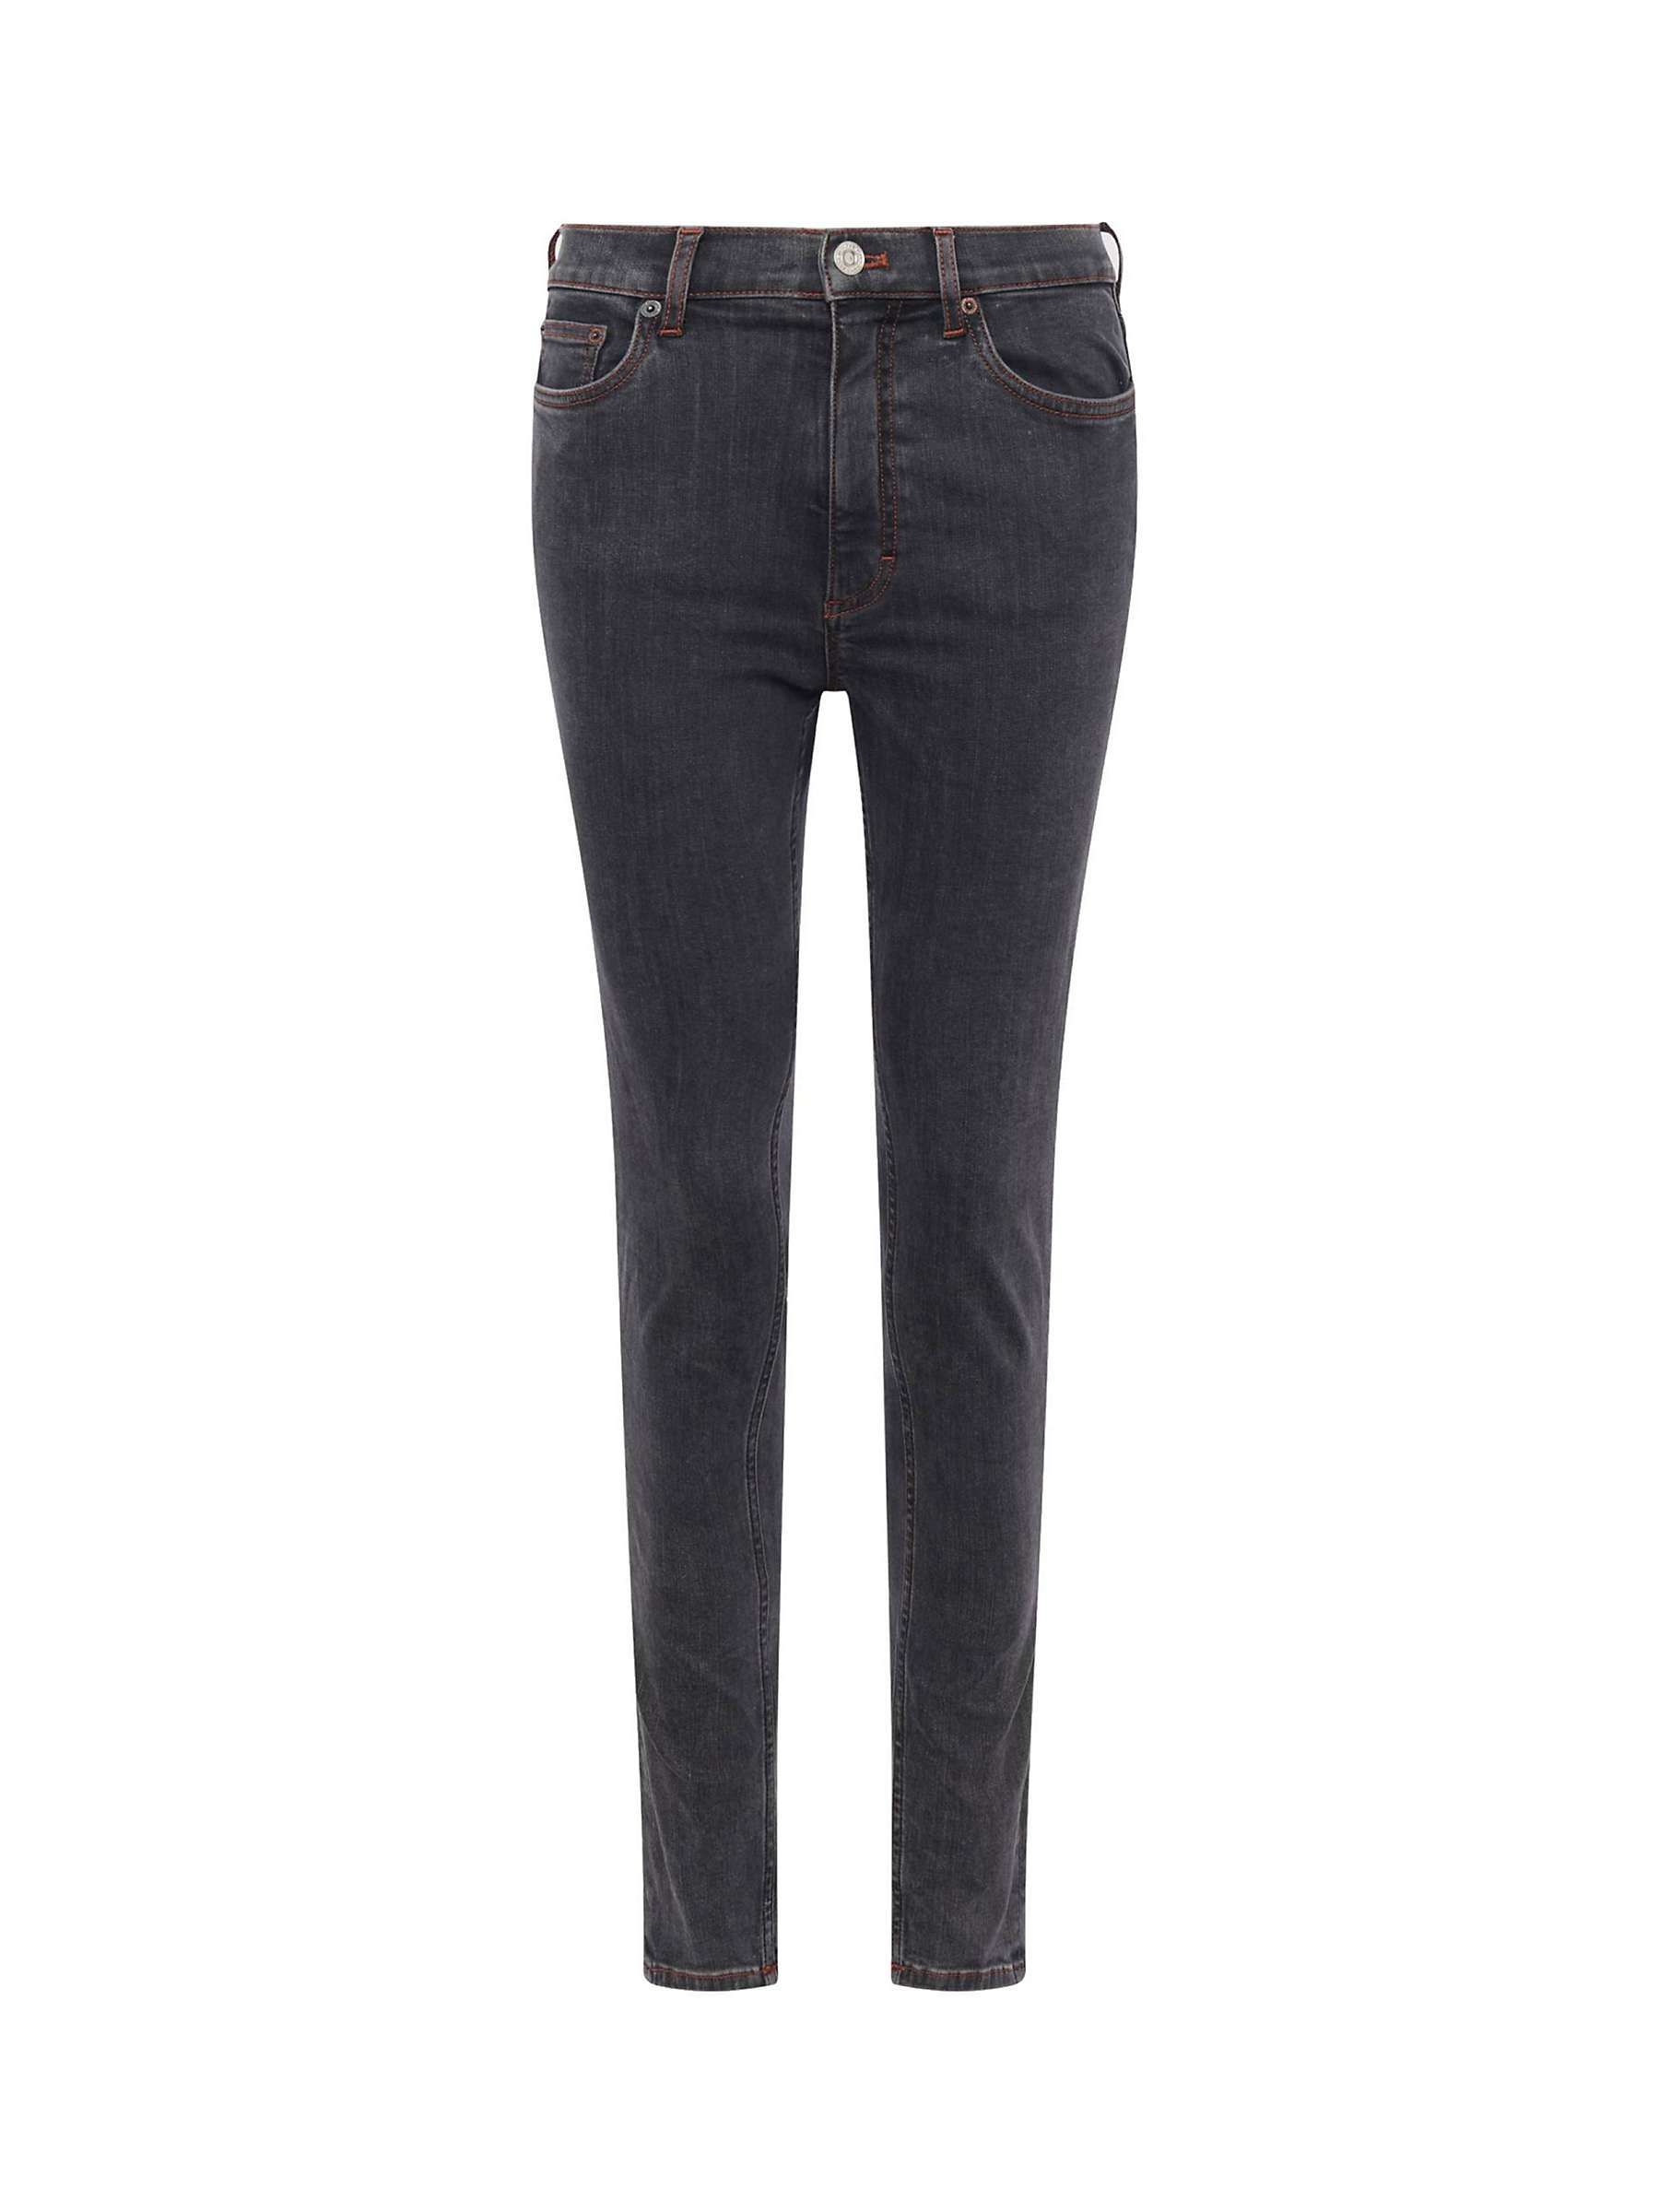 French Connection Rebound Skinny Jeans, Dark Blue at John Lewis & Partners